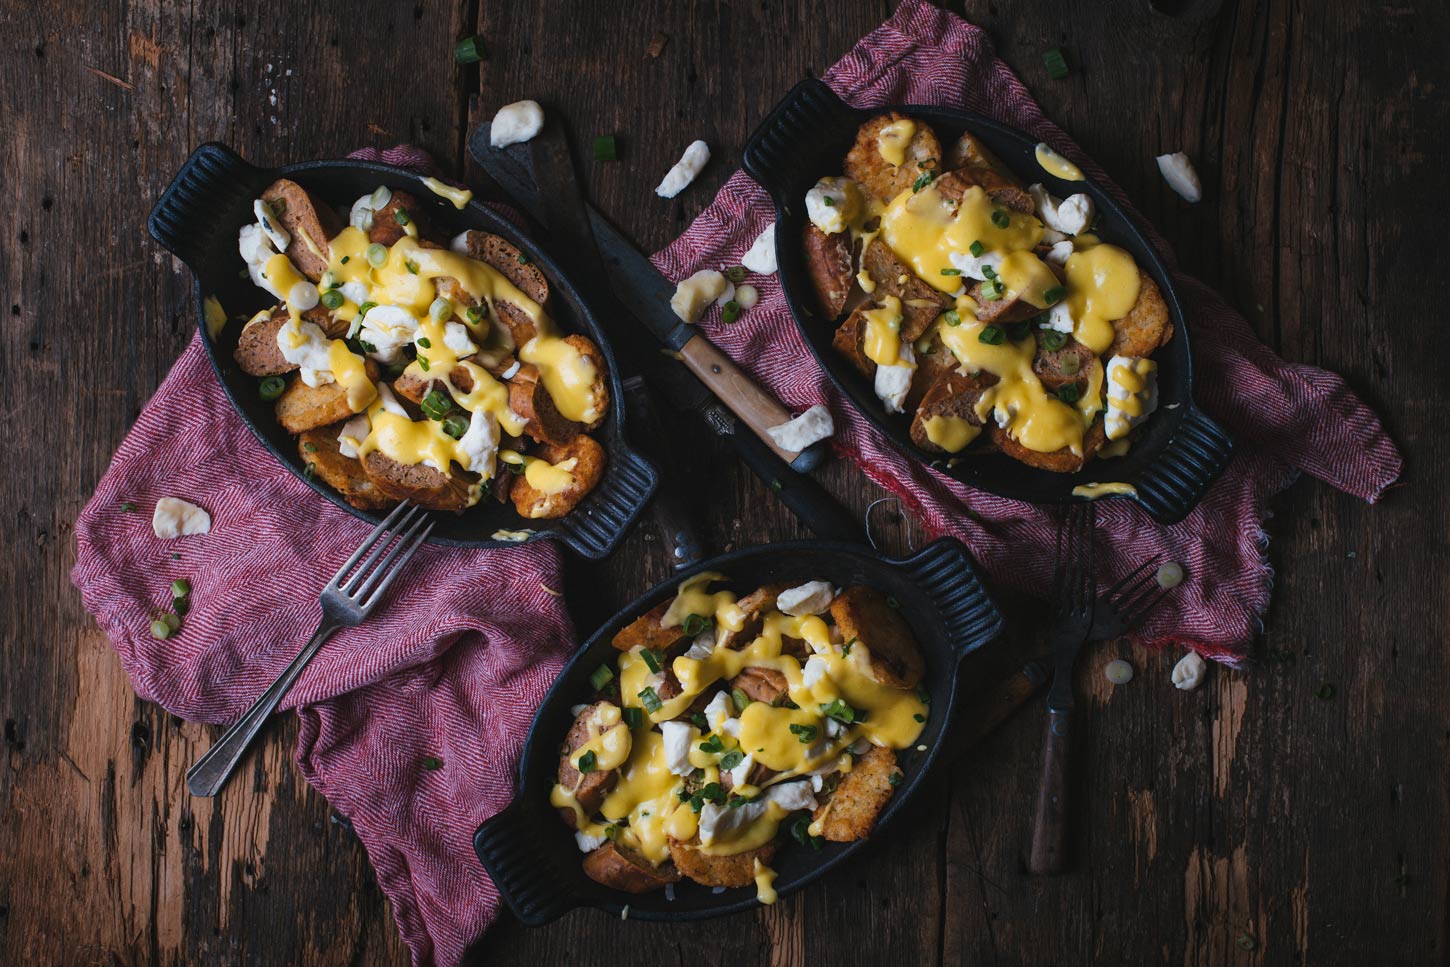 breakfast poutine with sausages, potatoes and cheese